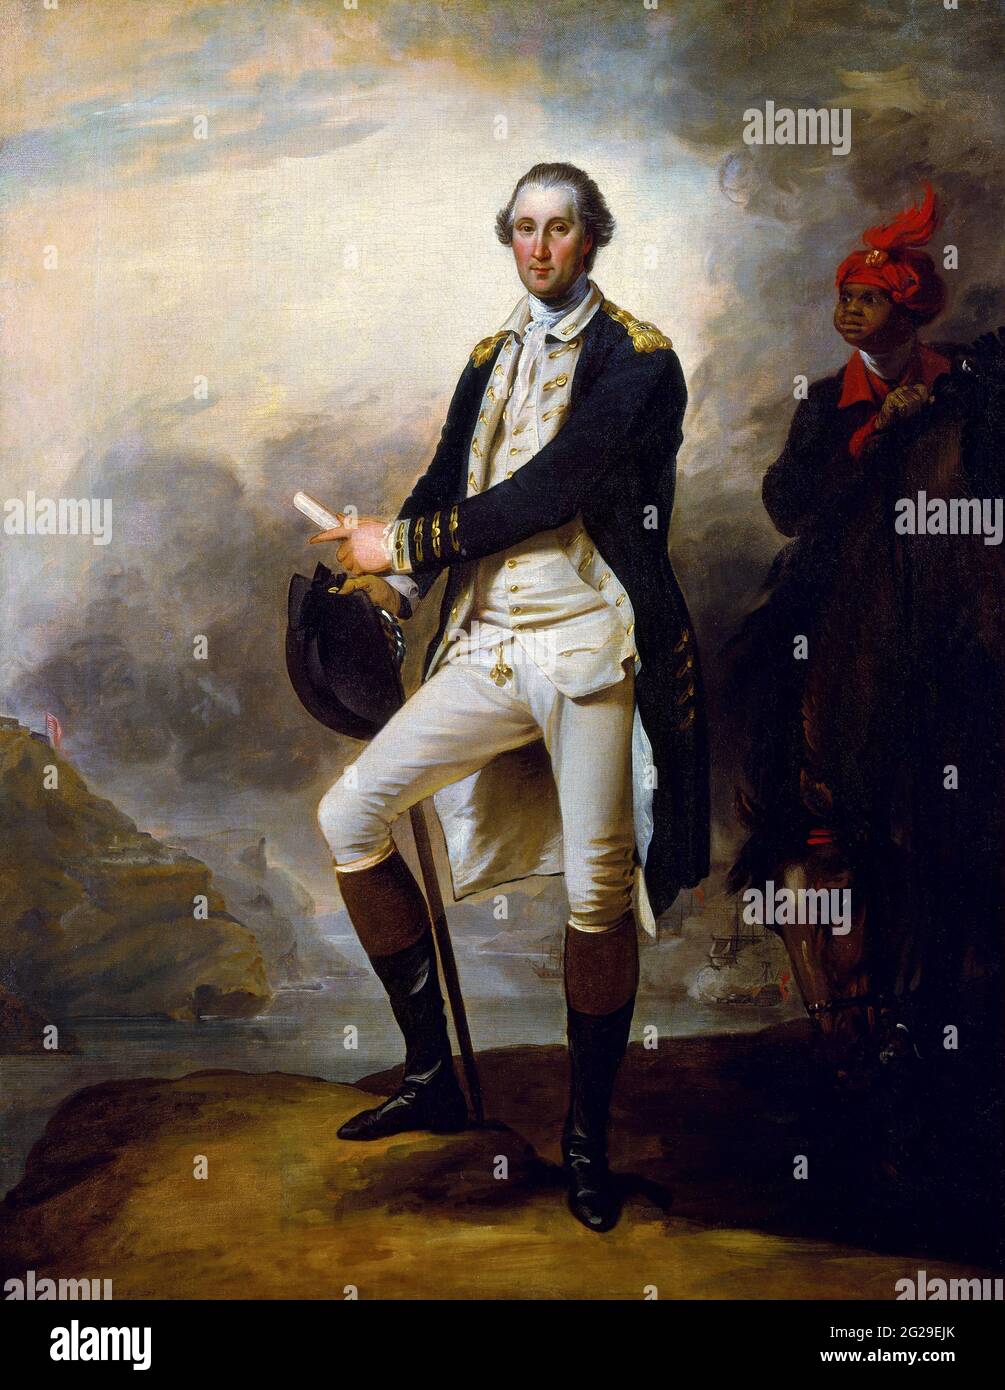 George Washington and William Lee by John Trumbull, oil on canvas, 1780 Stock Photo